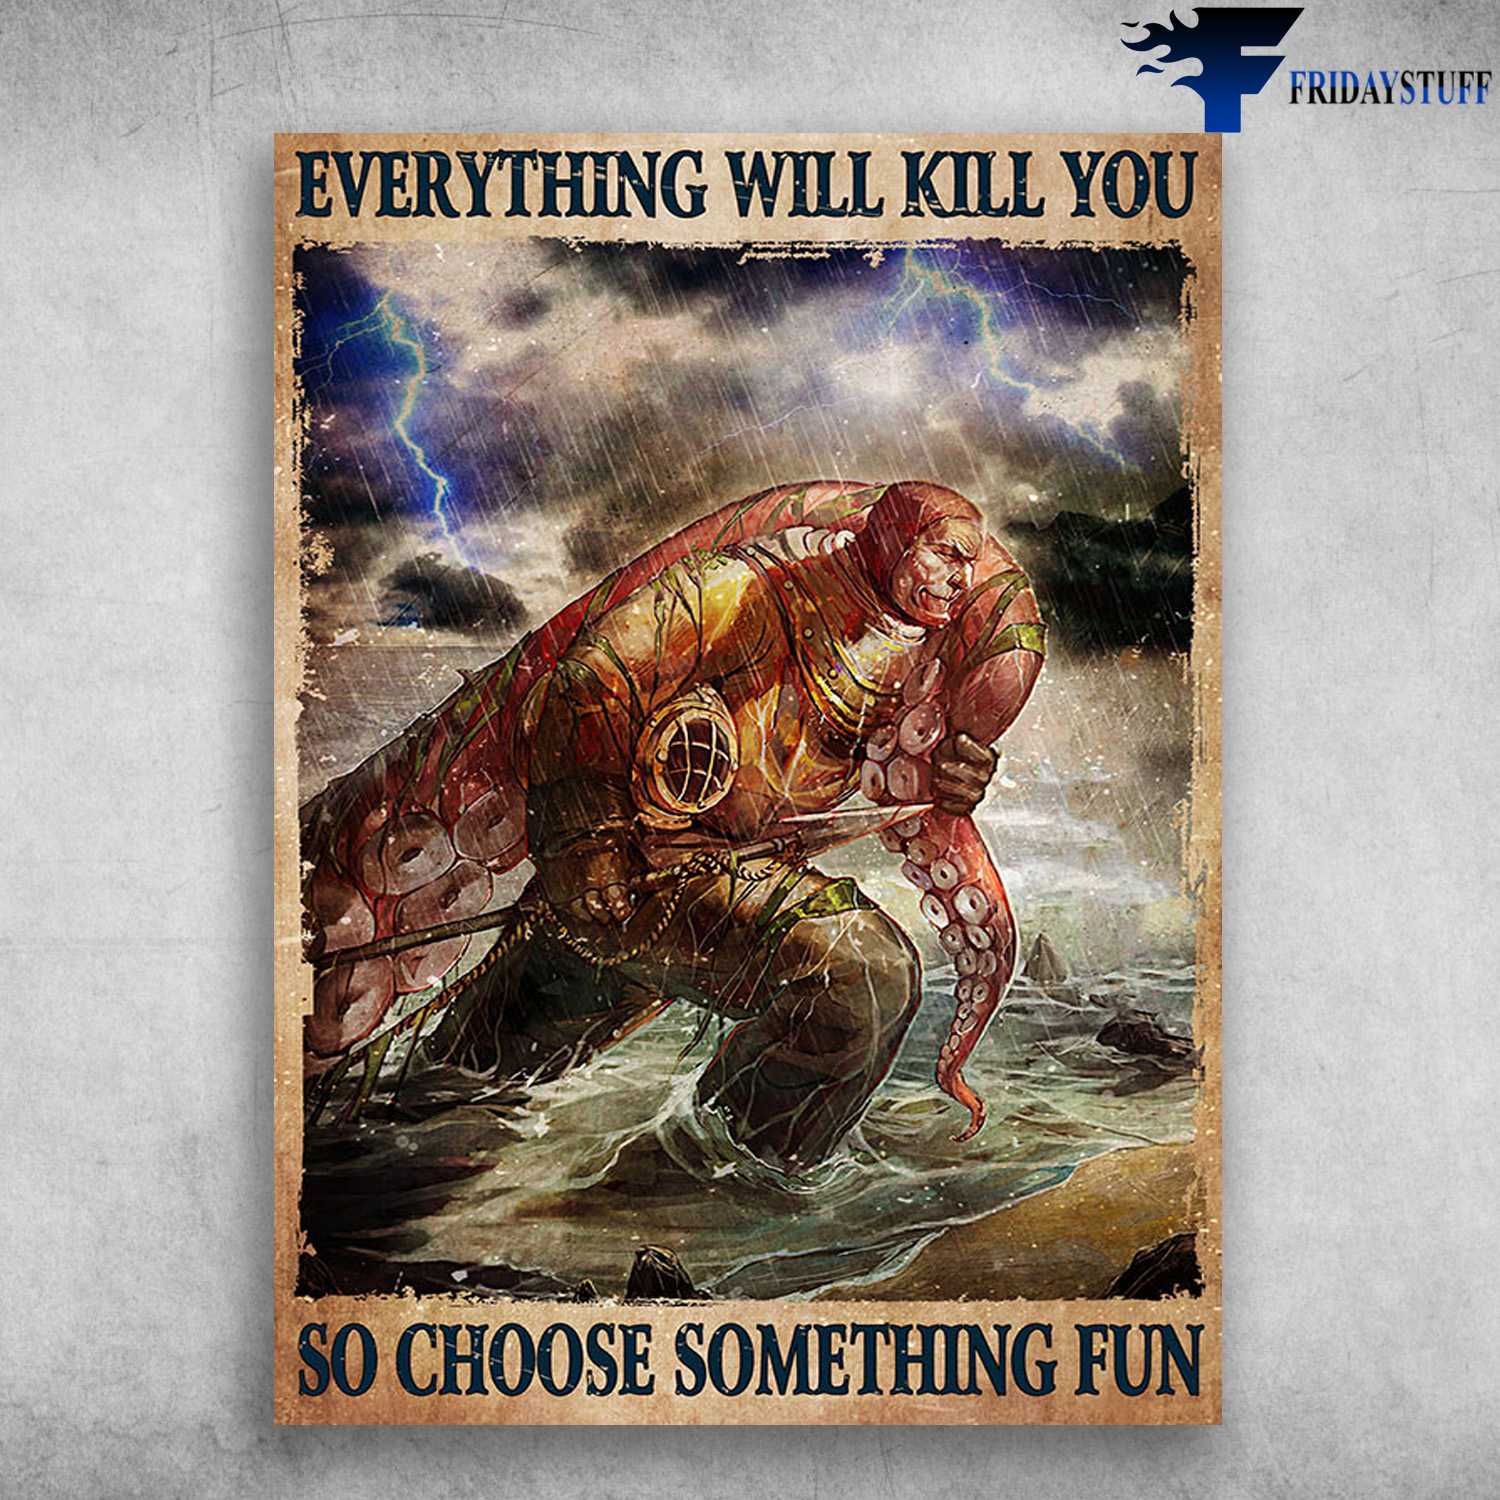 Diver And Octopus, Scuba Diving - Everything Will Kill You, So Choose Something Fun